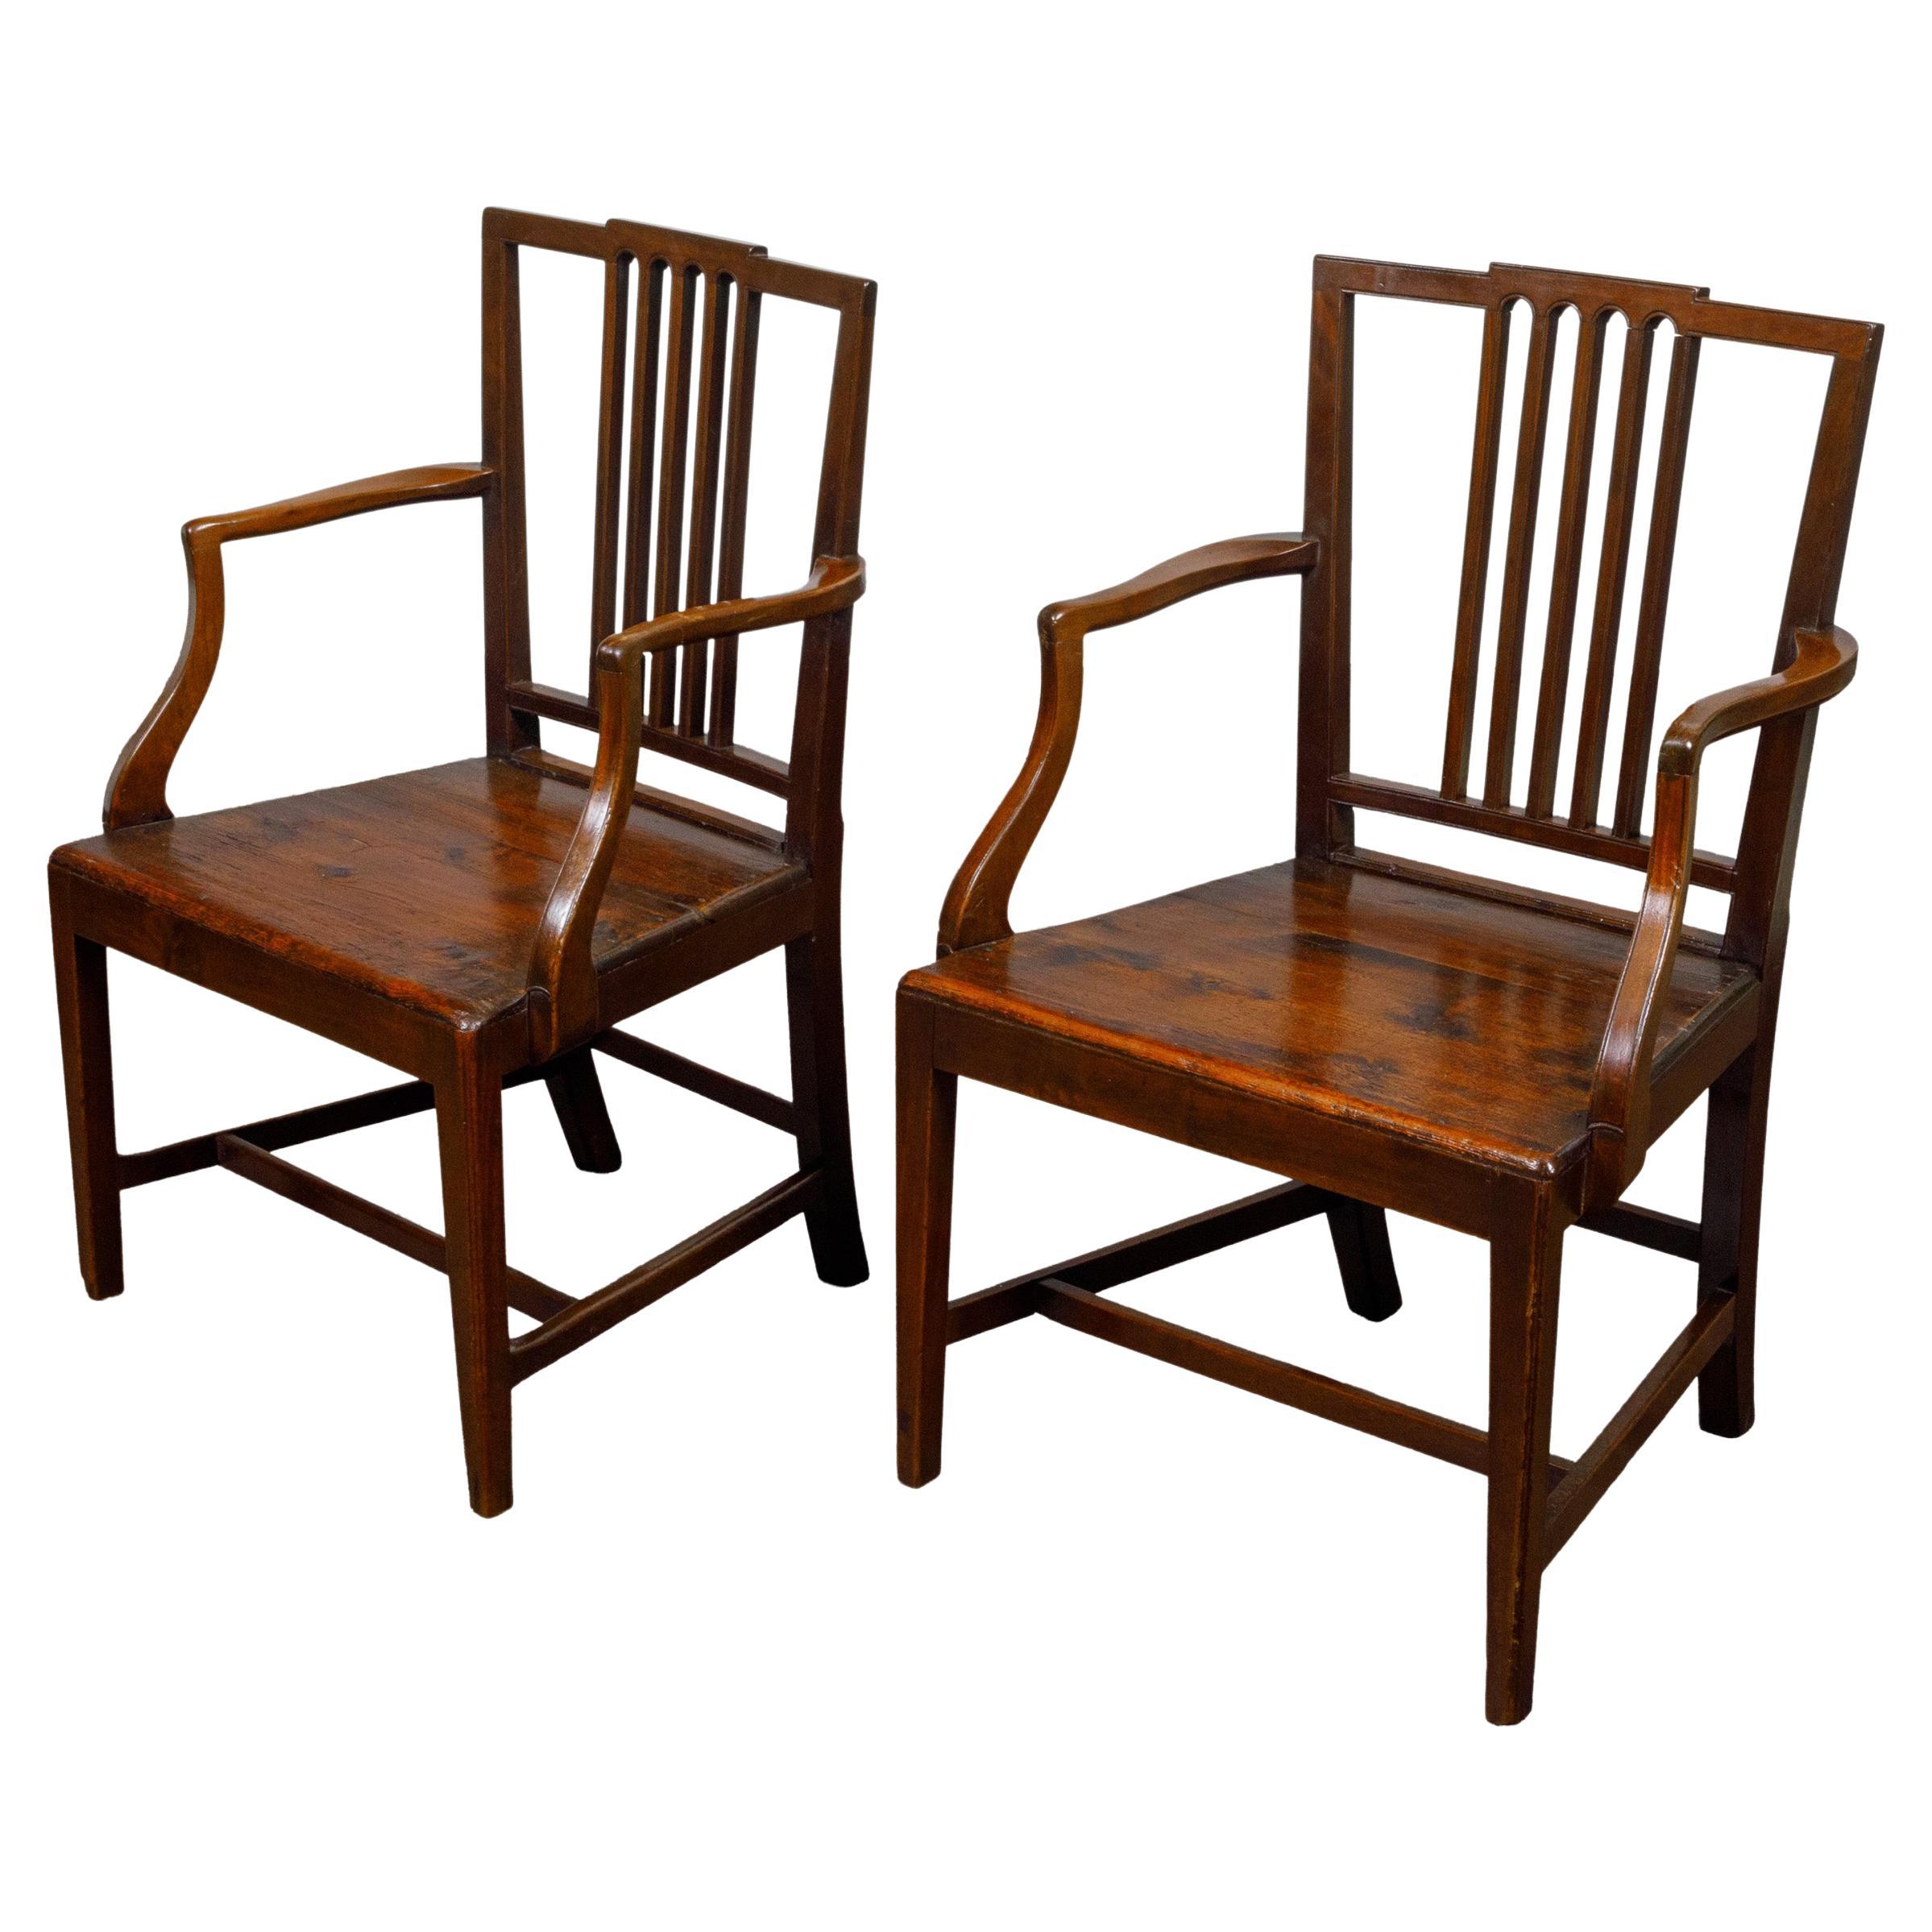 Pair of English Early 19th Century Plank Seat Chairs with Scrolling Arms